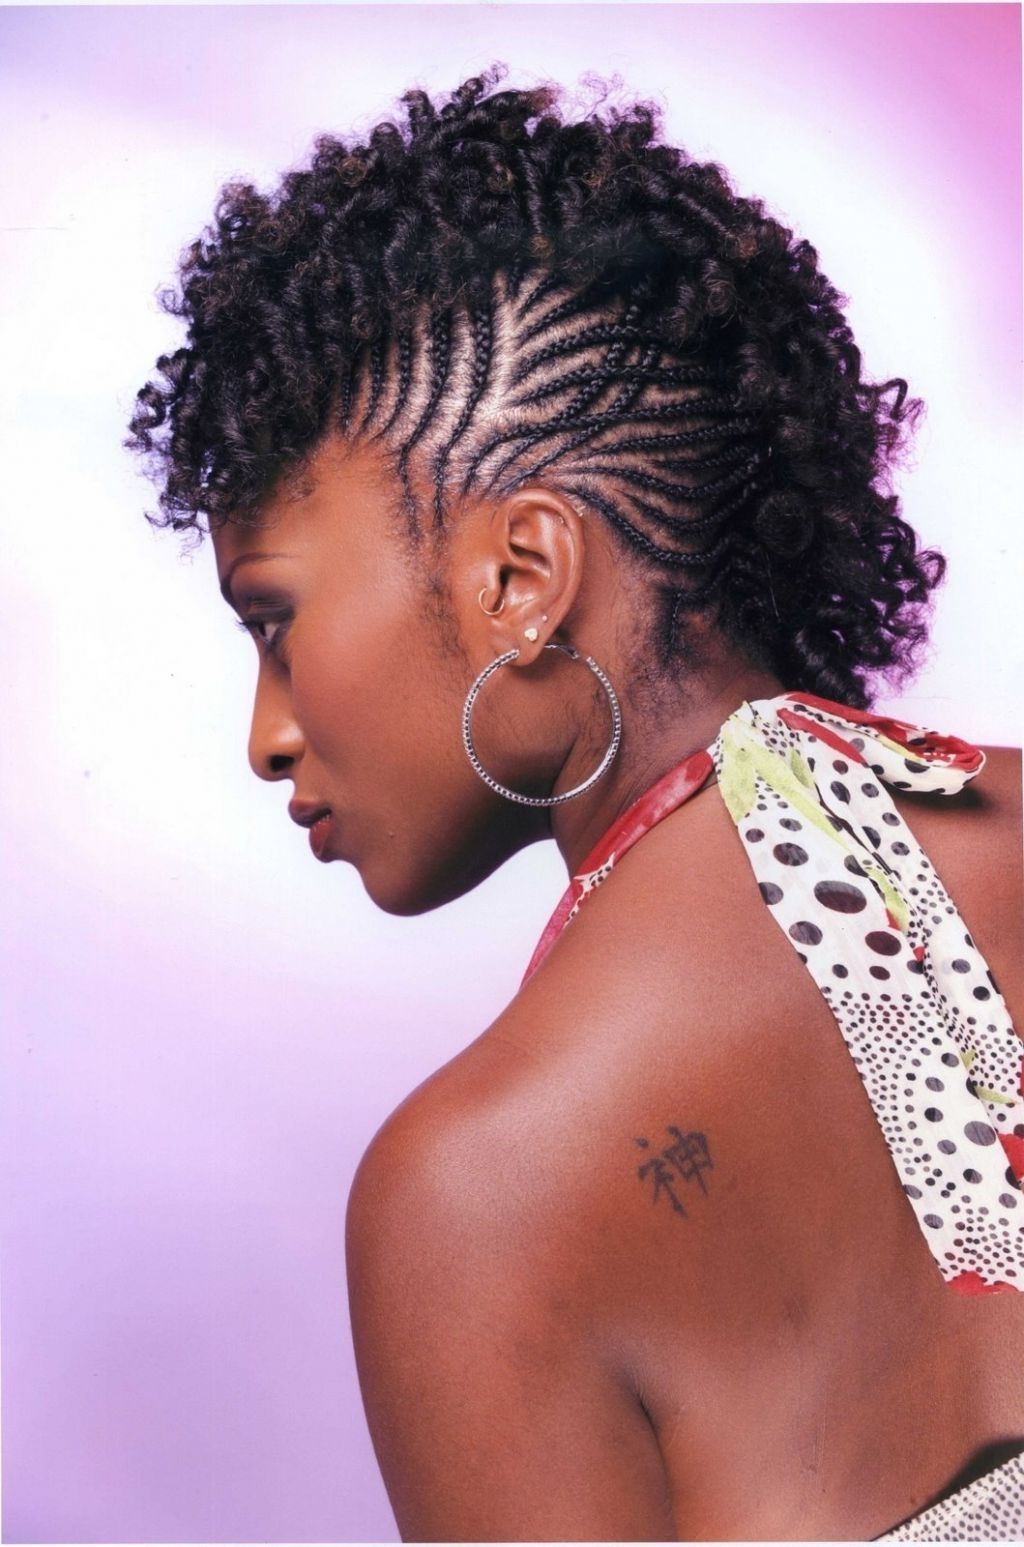 Widely Used Braided Hairstyles For Short African American Hair Intended For √ 24+ Fresh Braid Hairstyles For Short Hair African American (View 8 of 15)